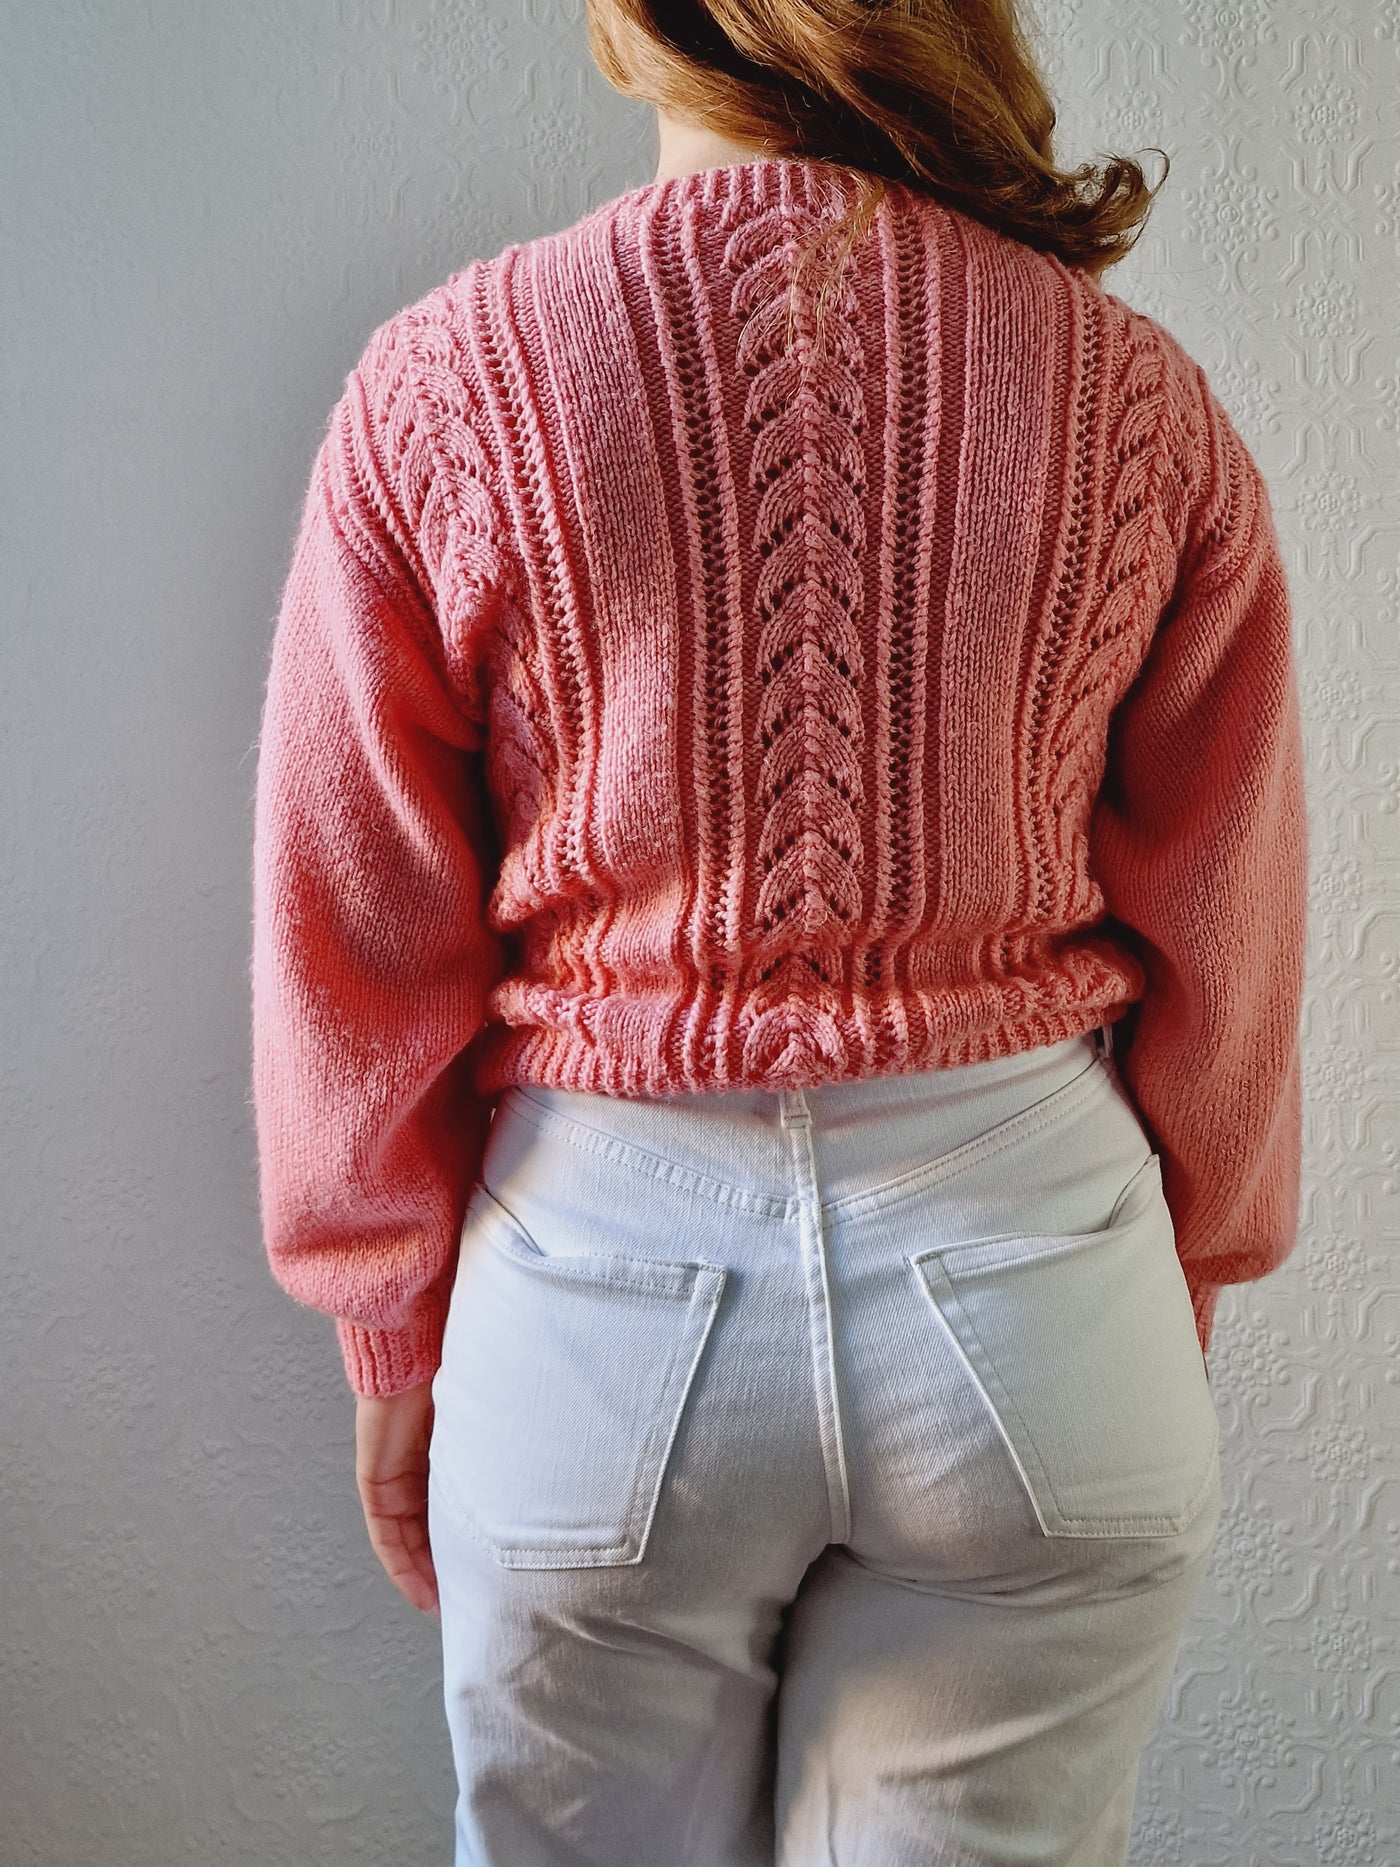 Vintage 80s Handknitted Coral Pink Jumper with Crew Neck - S/M